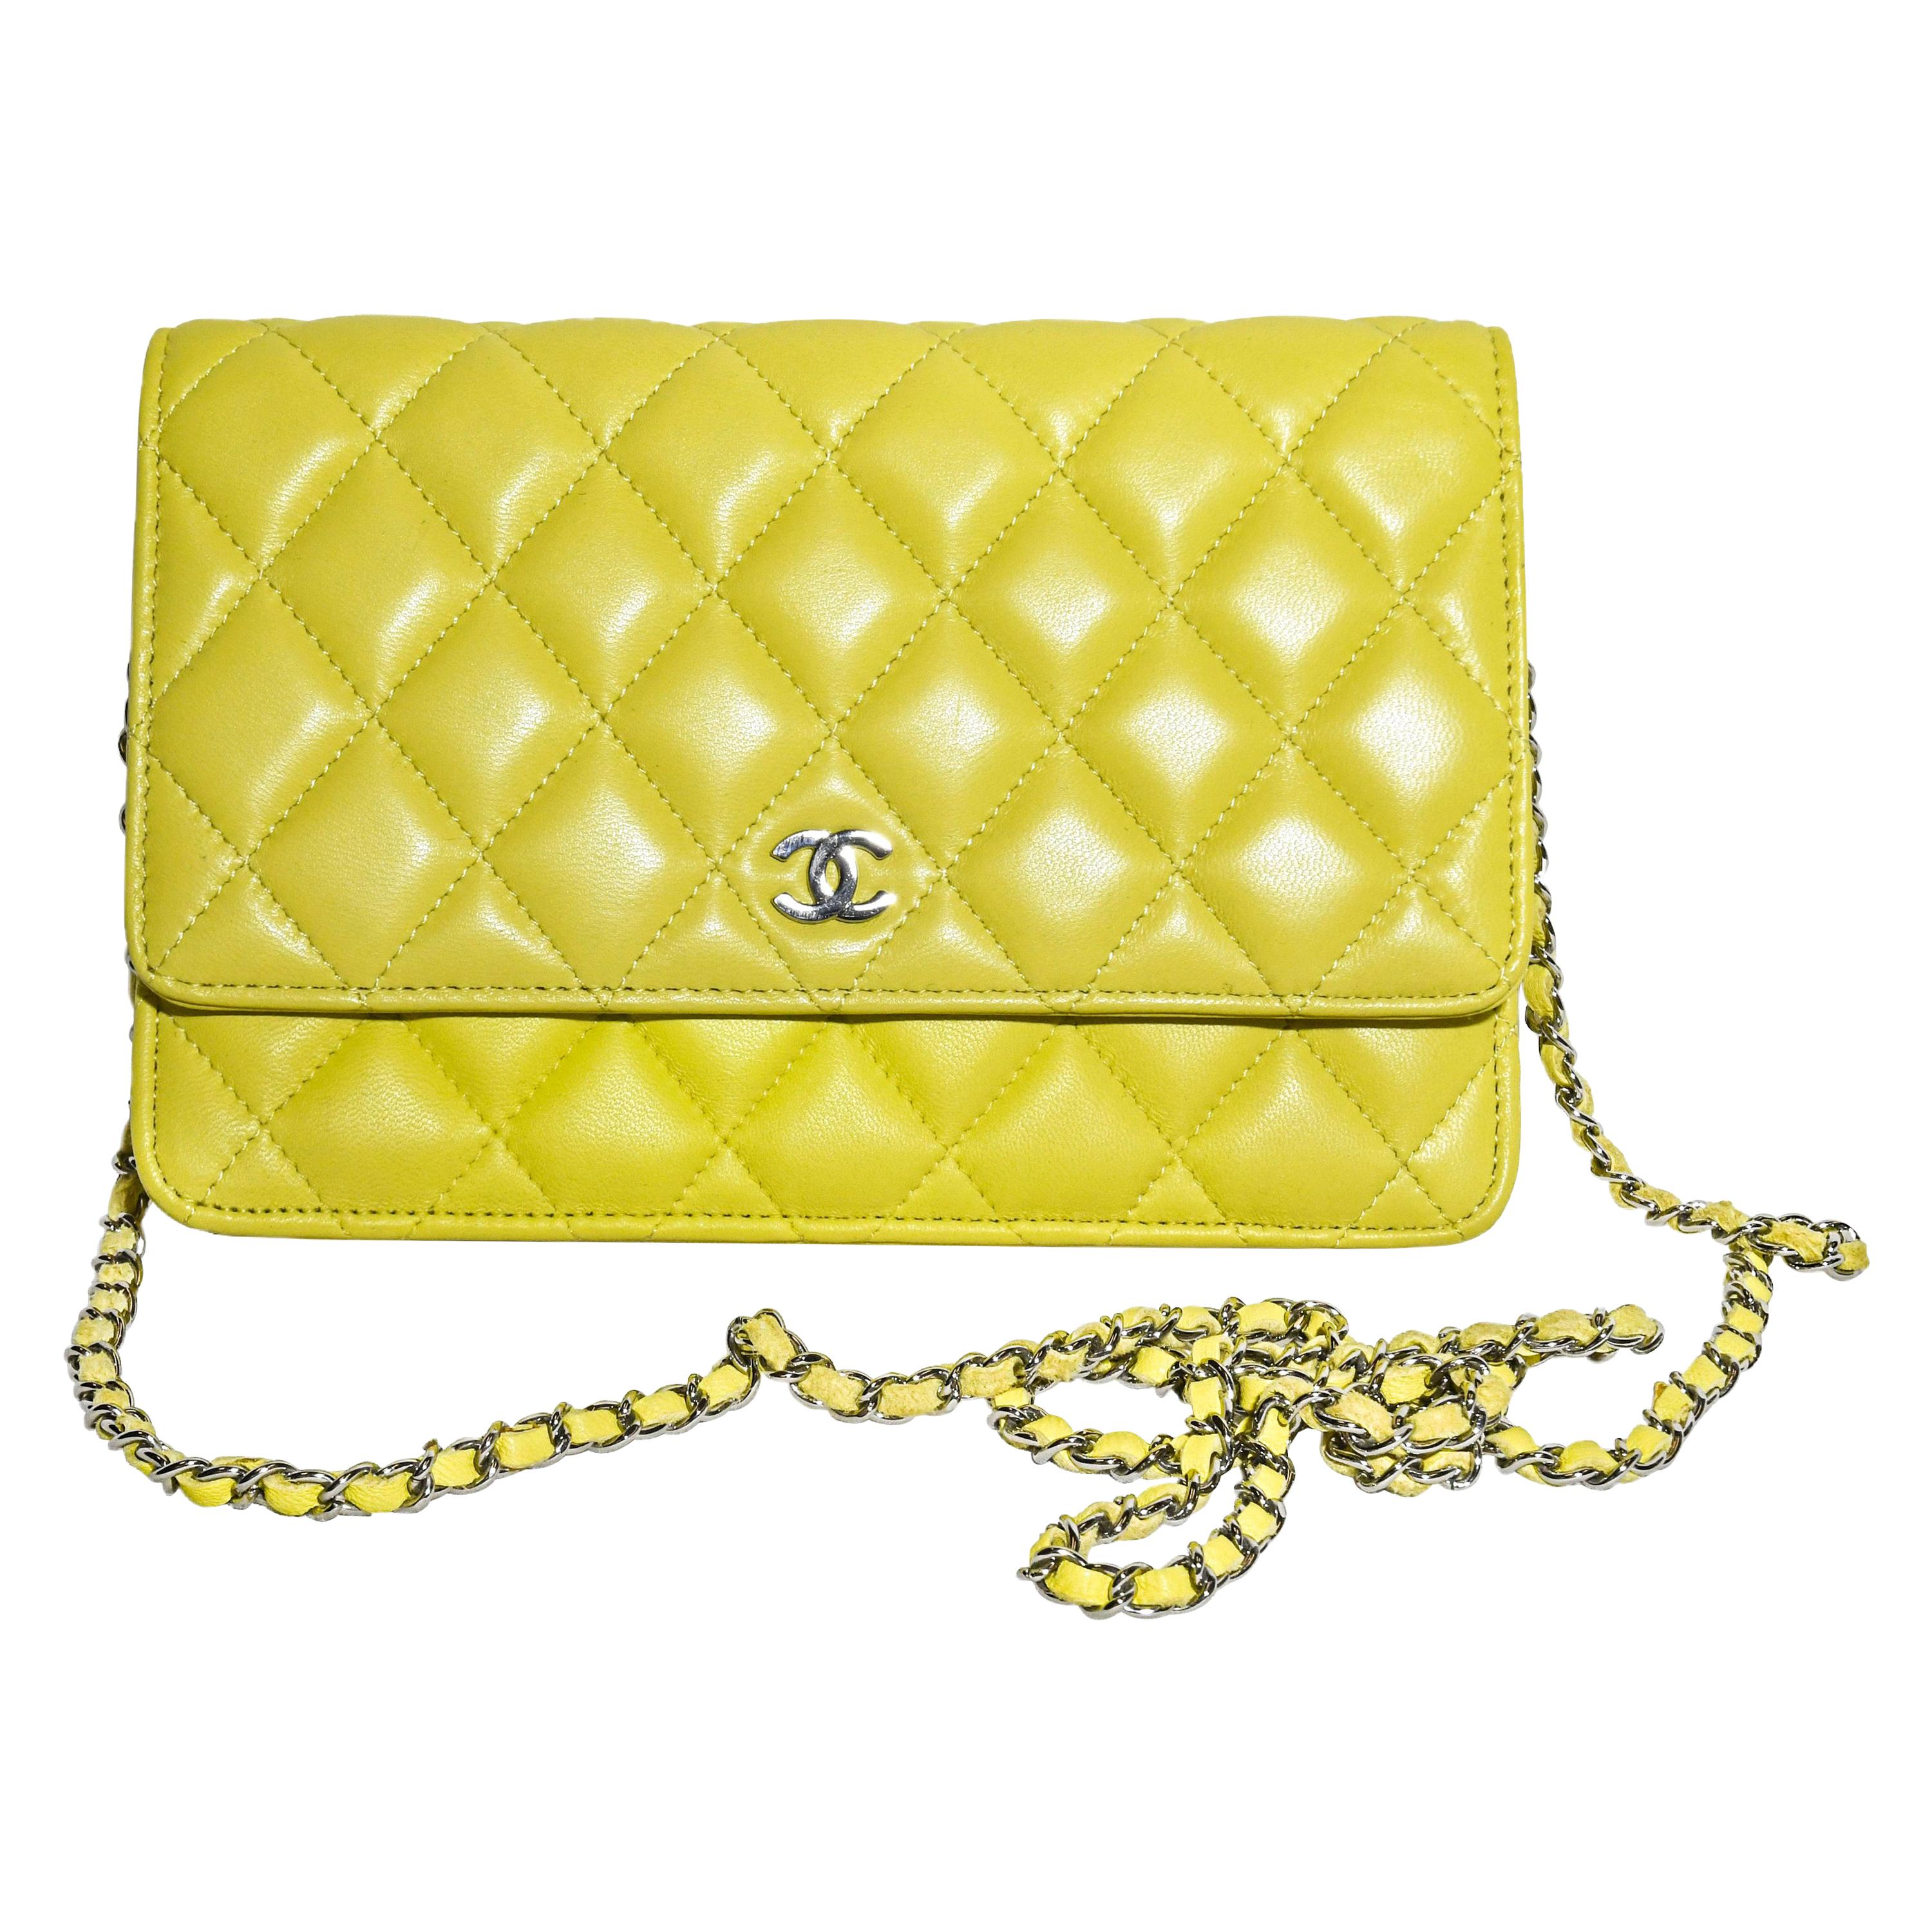 Chanel Lemon Lime Quilted Leather W/ Silver Tone Shoulder Chain Link Flap Wallet